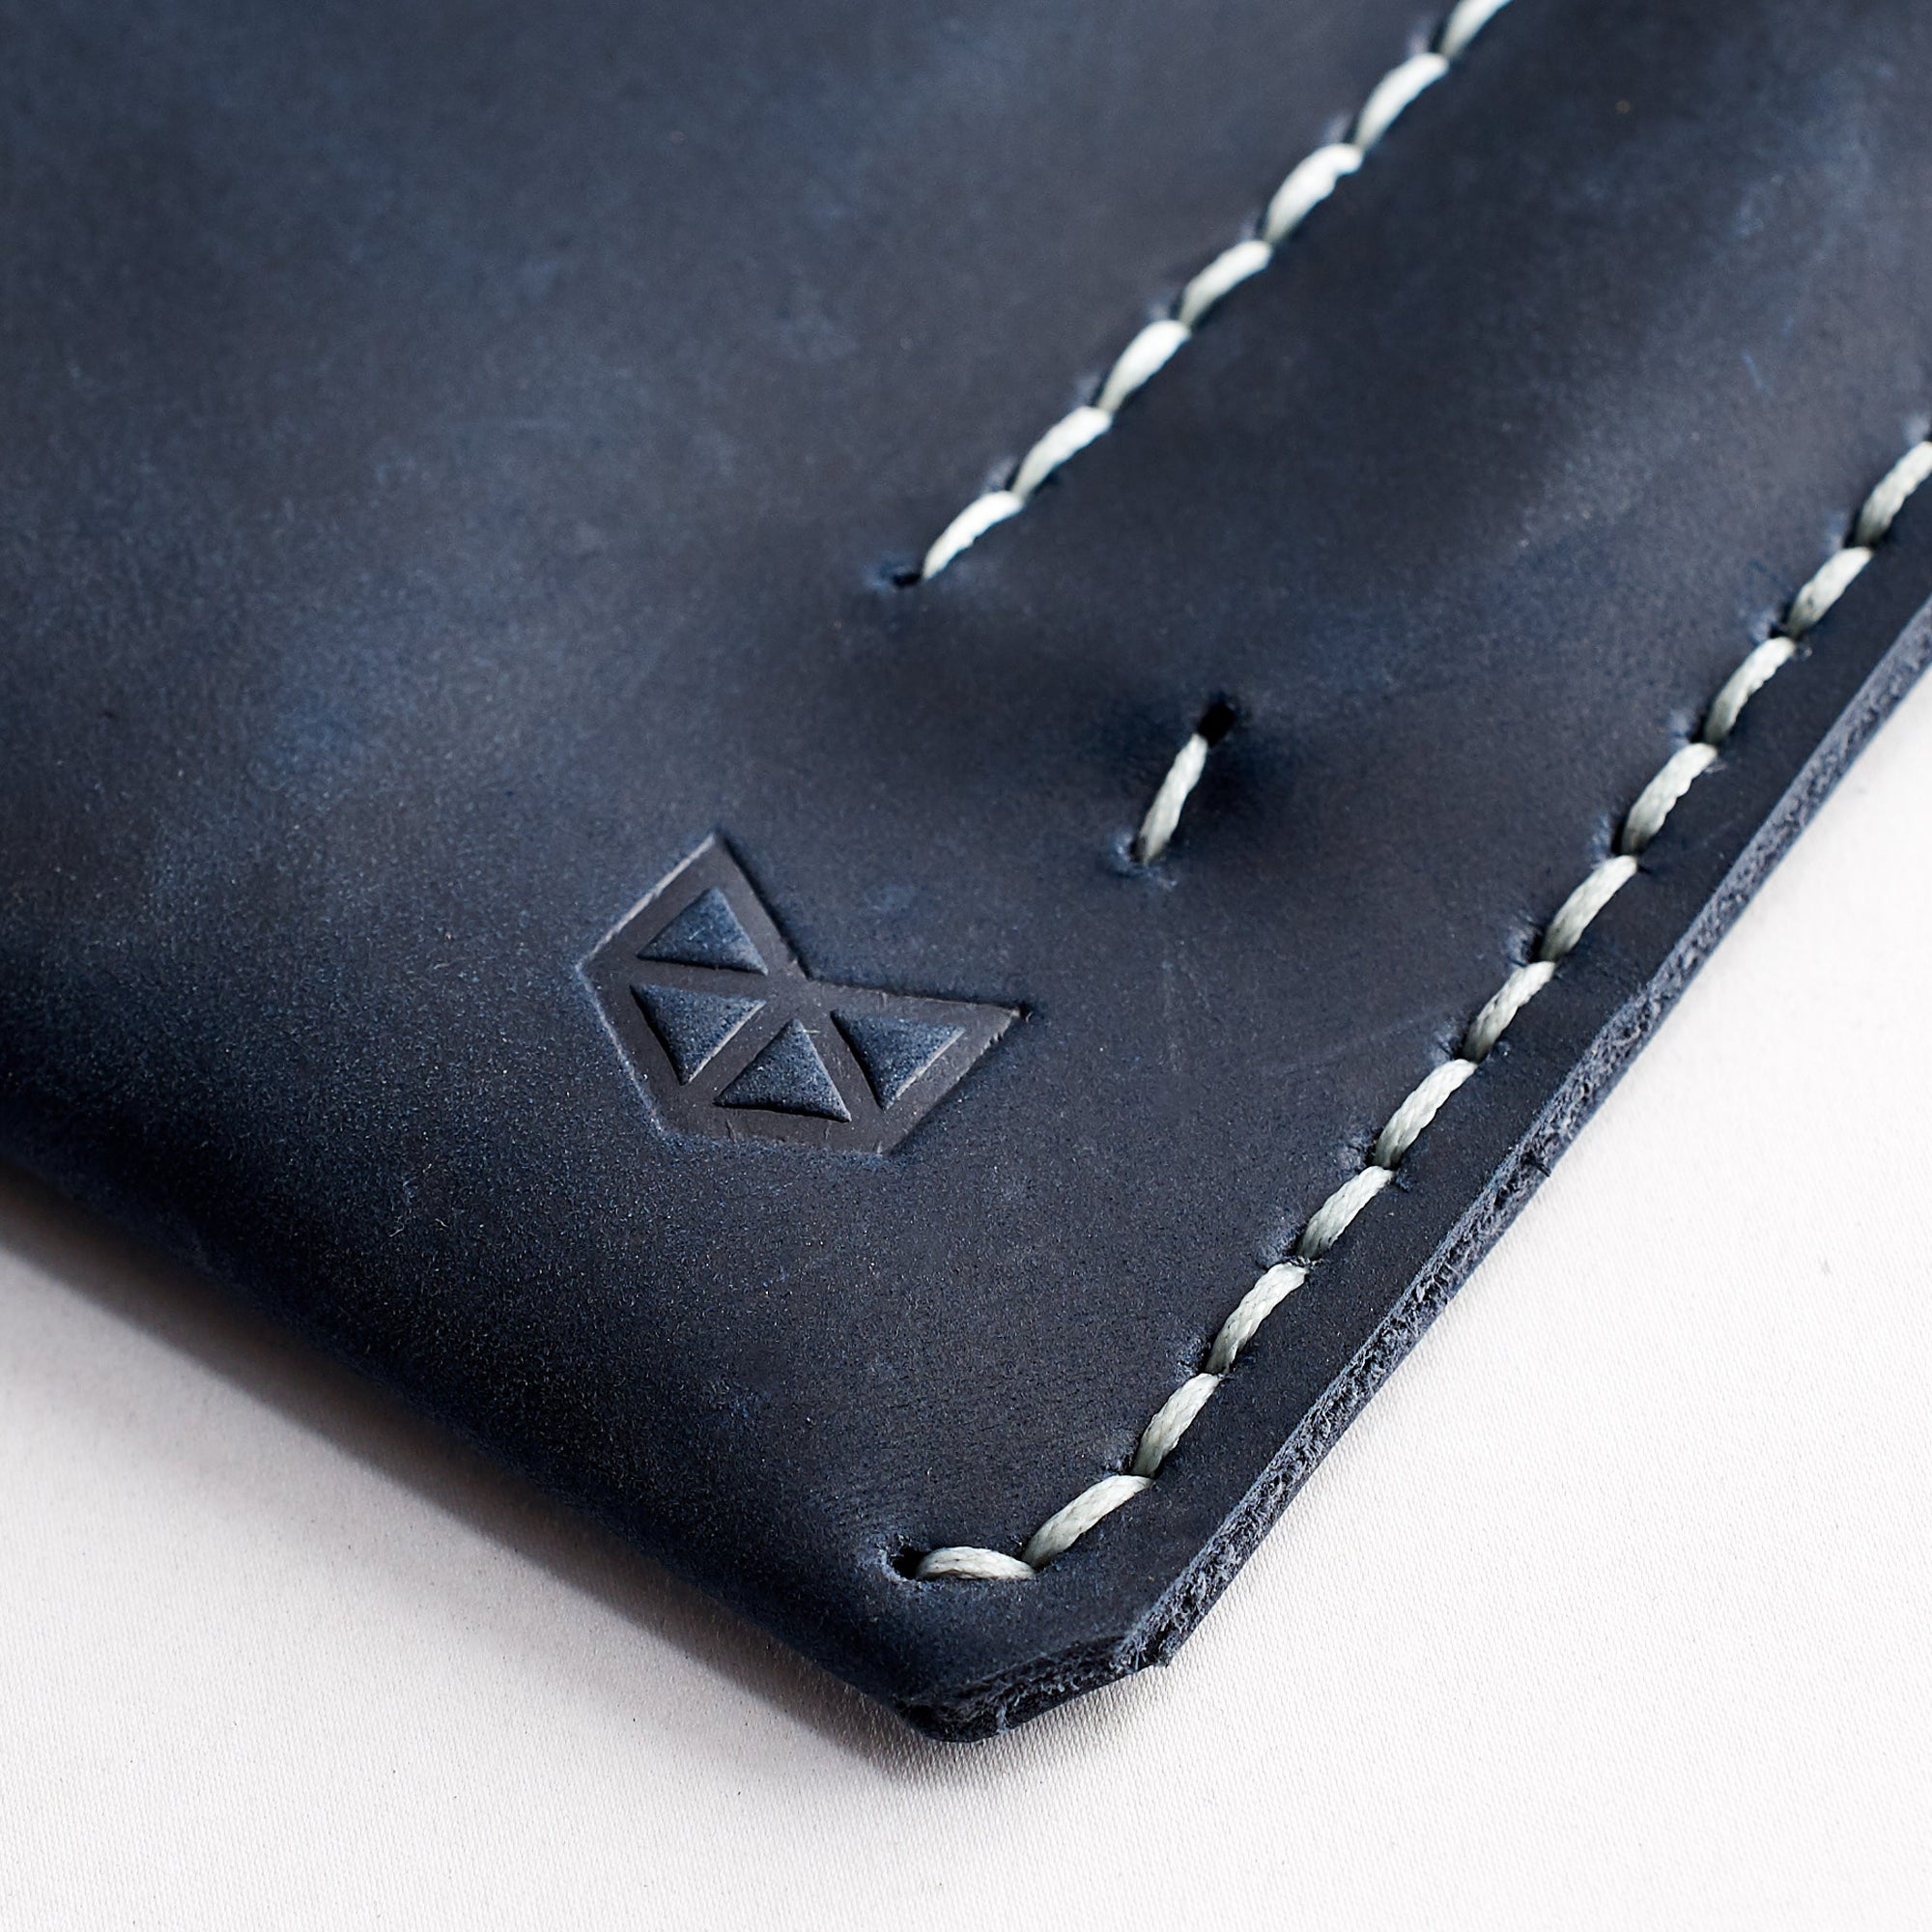 Hand stitched case. Blue leather sleeve for ASUS Zenbook Pro Duo. Mens gifts